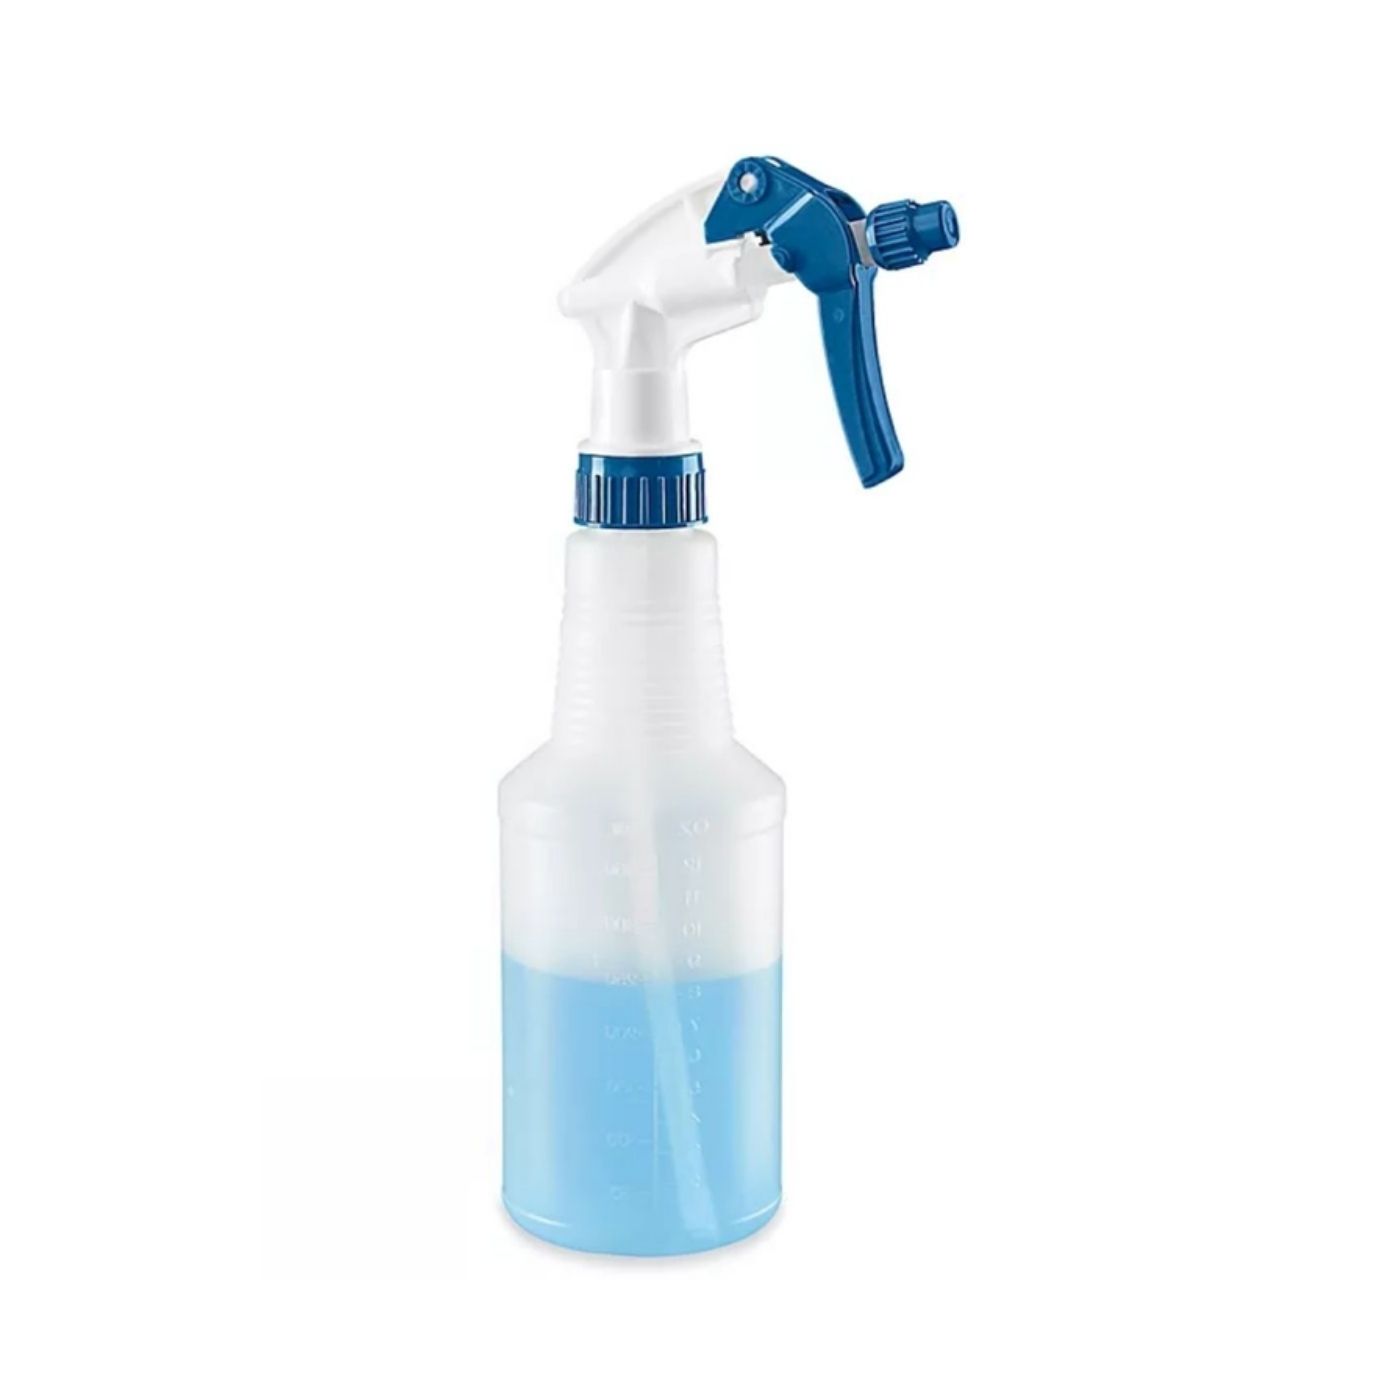 ULINE s-11686 16oz Bottle with Spayer